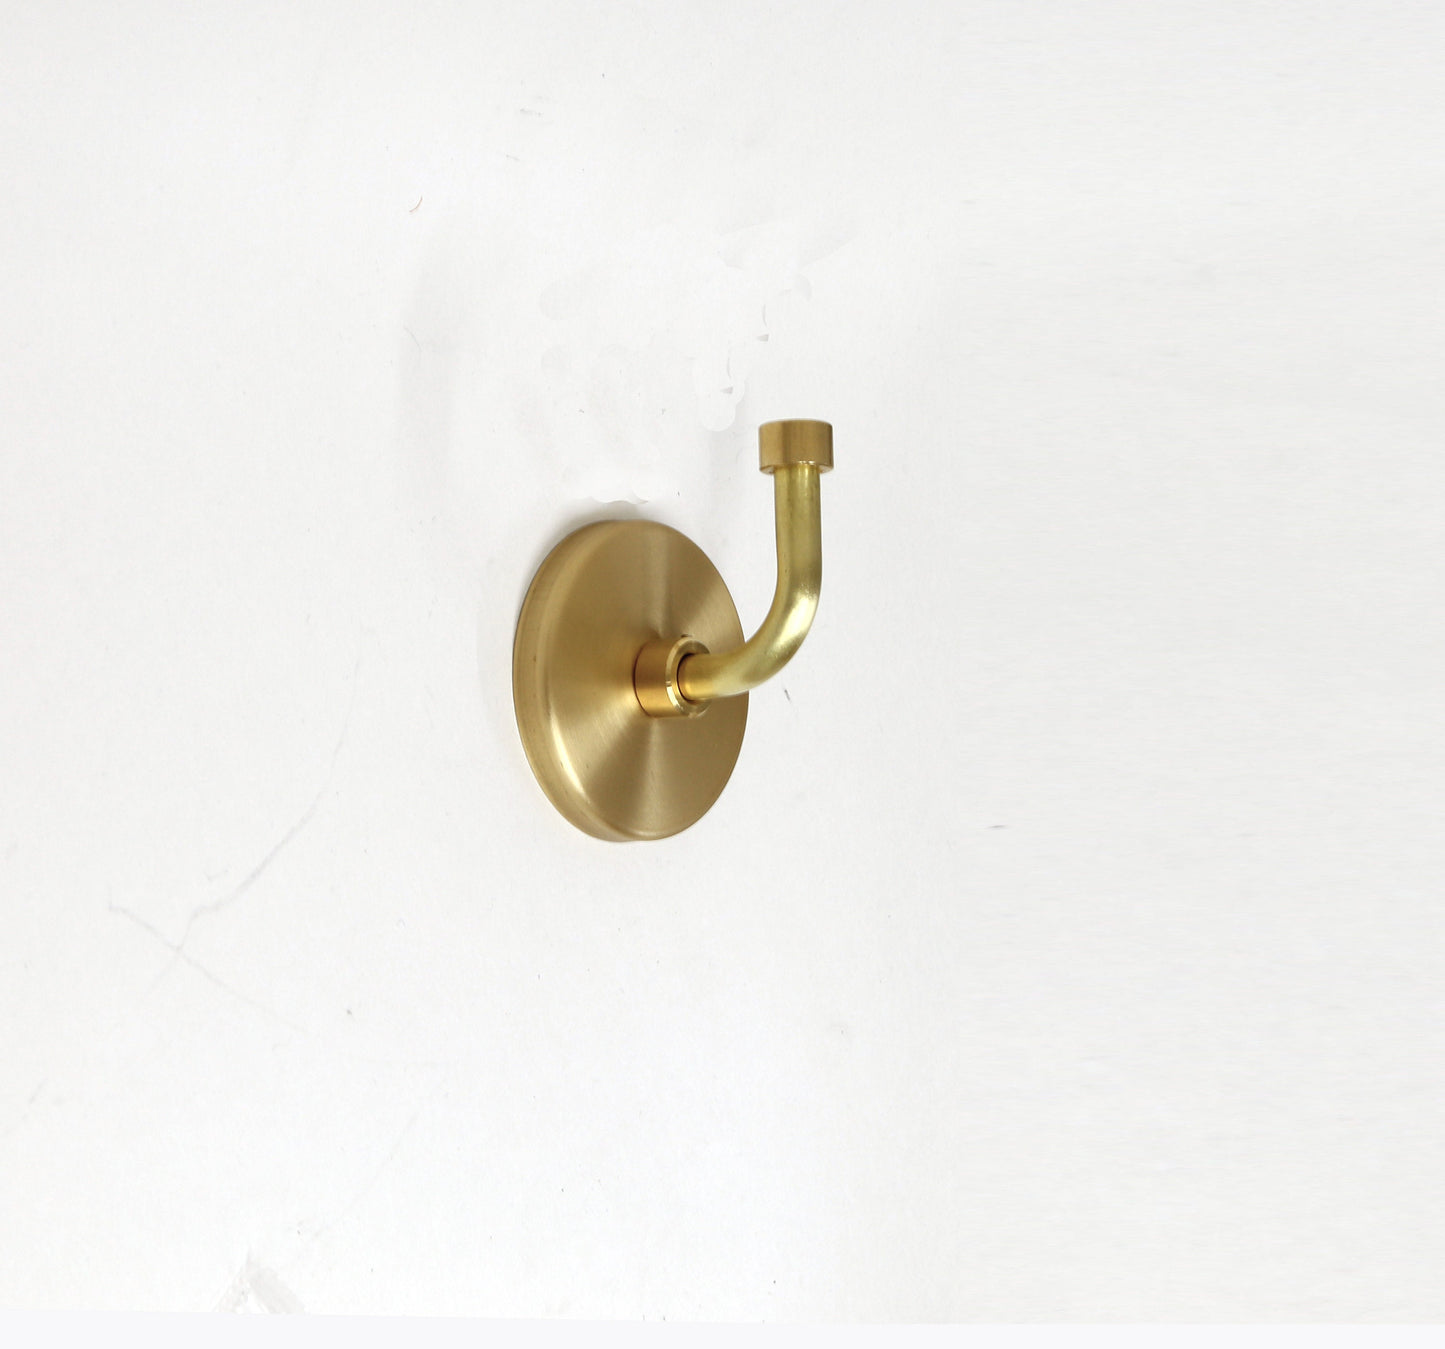 Brass Wall Hooks For The Bathroom And Kitchen -Towel Hook - Robe Hook-Key Hook